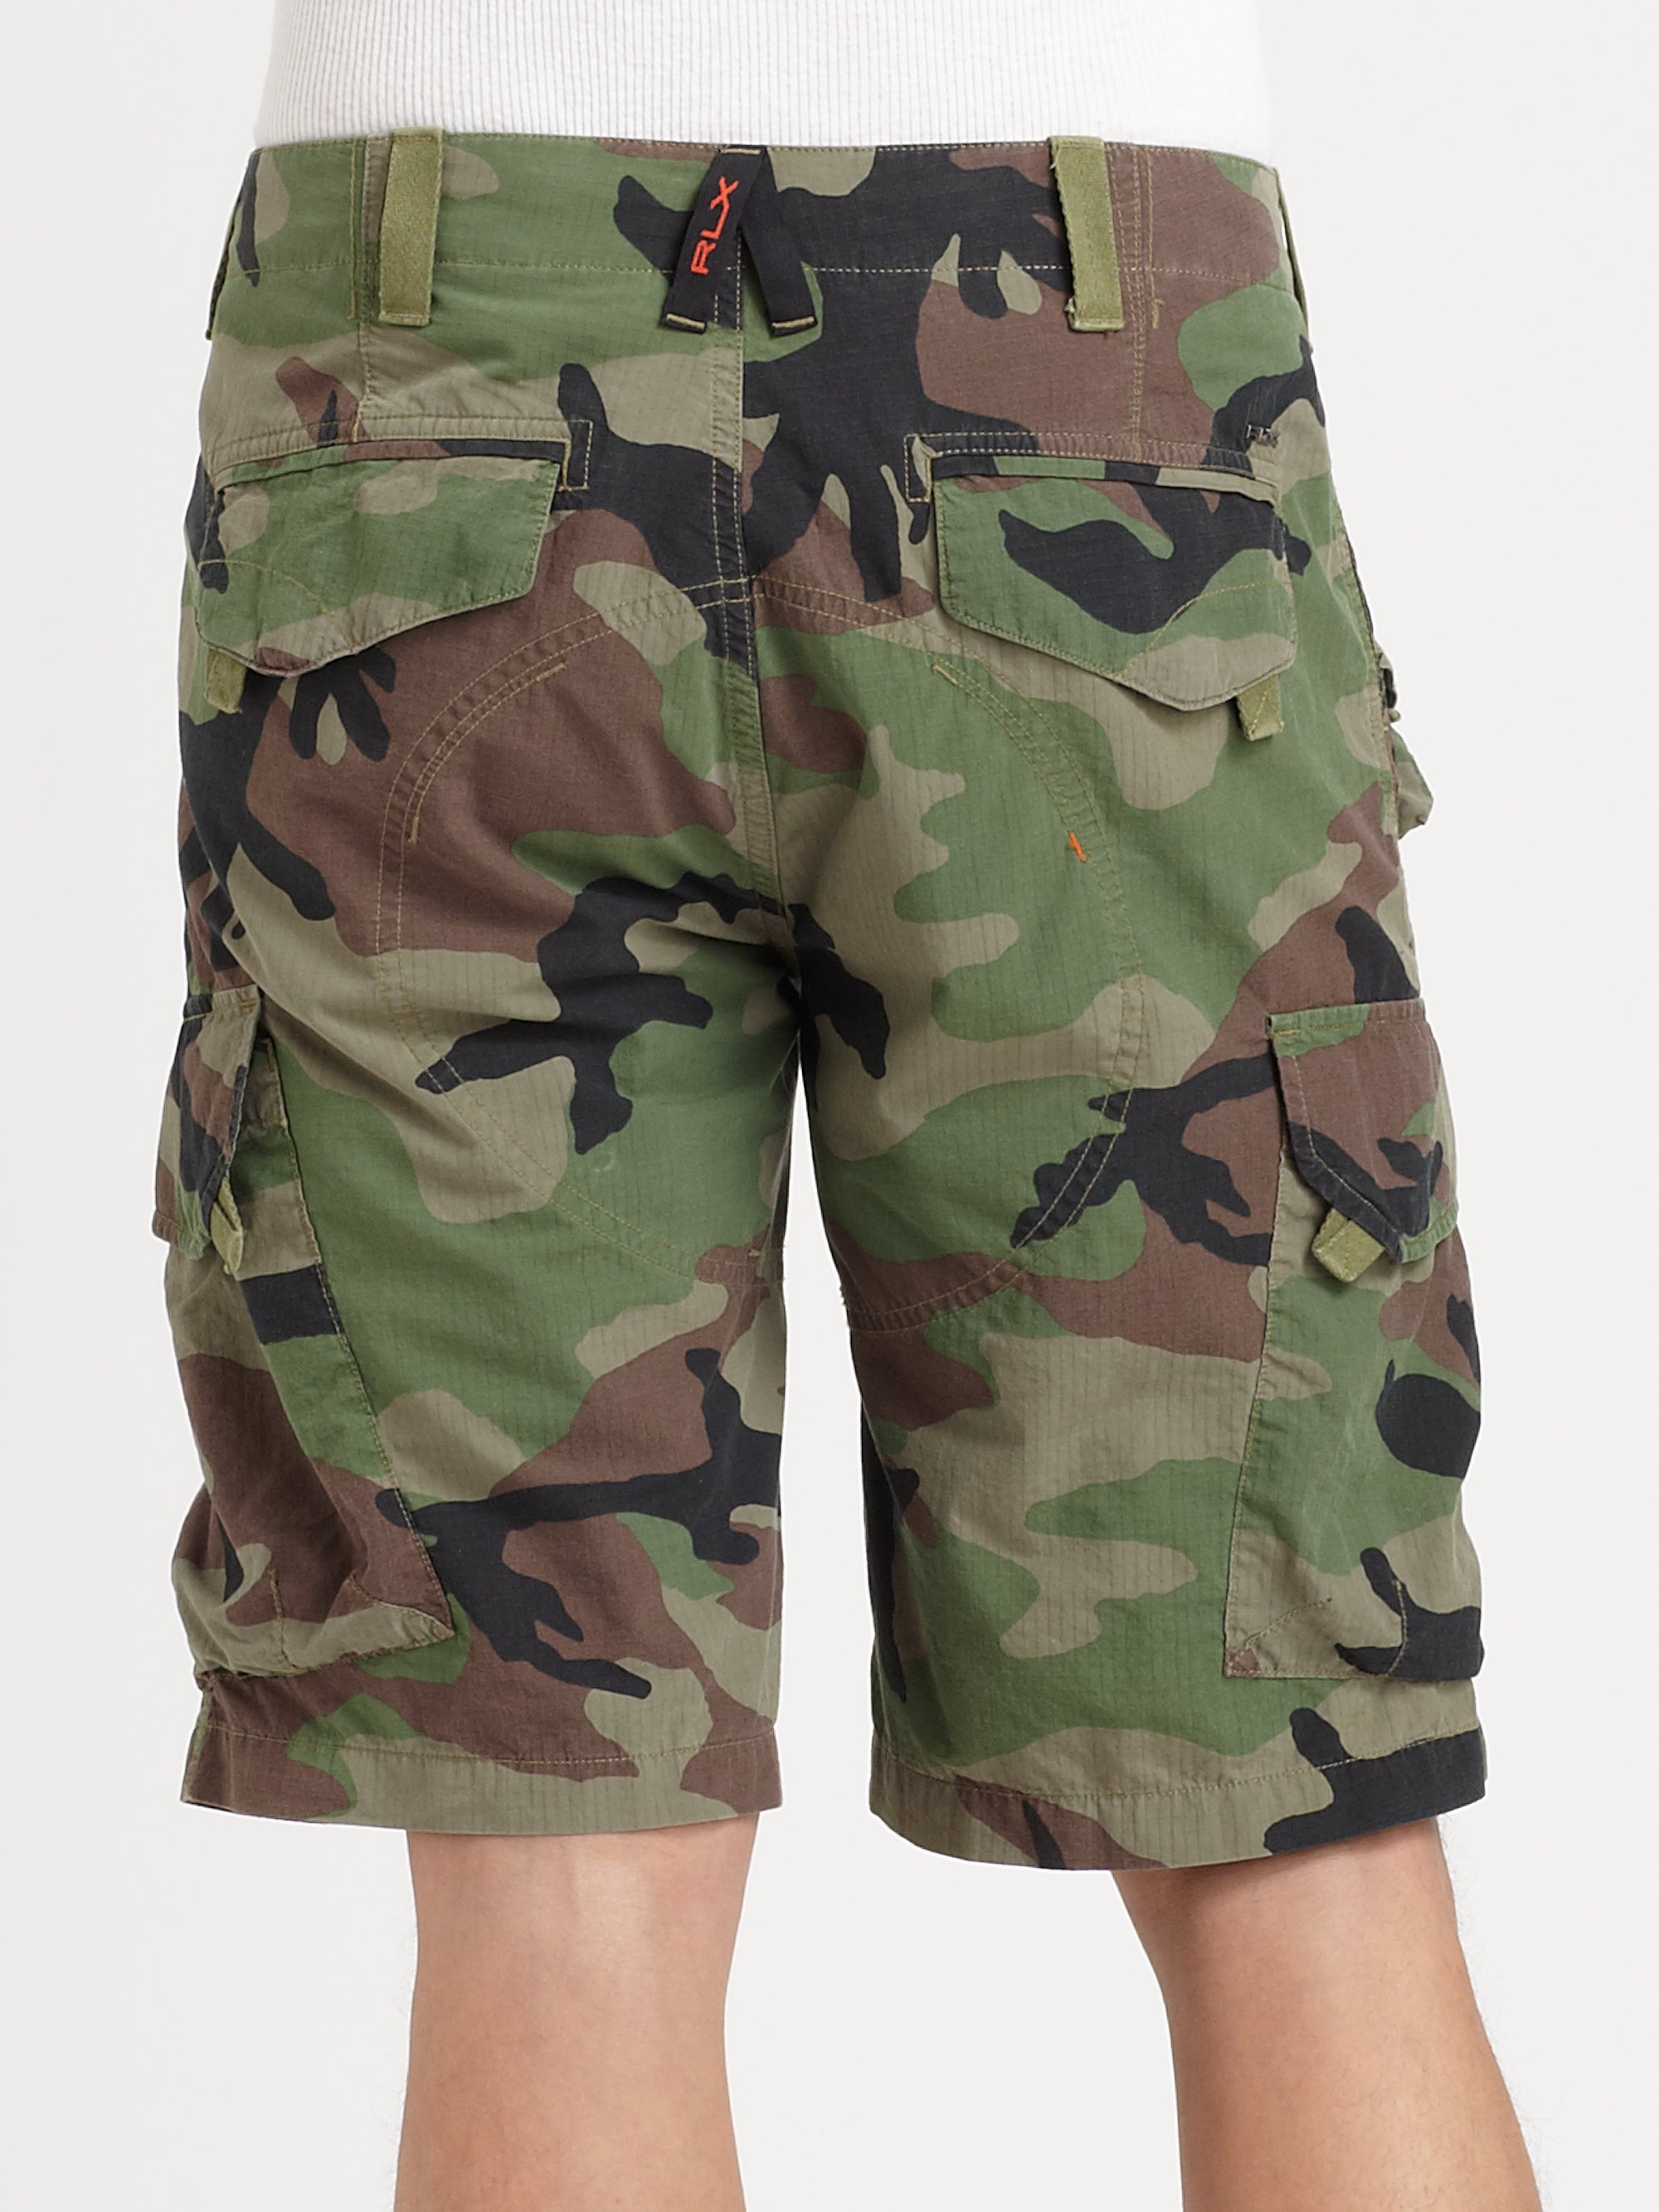 Lyst - Rlx Ralph Lauren Search Rescue Camouflage Shorts in Green for Men